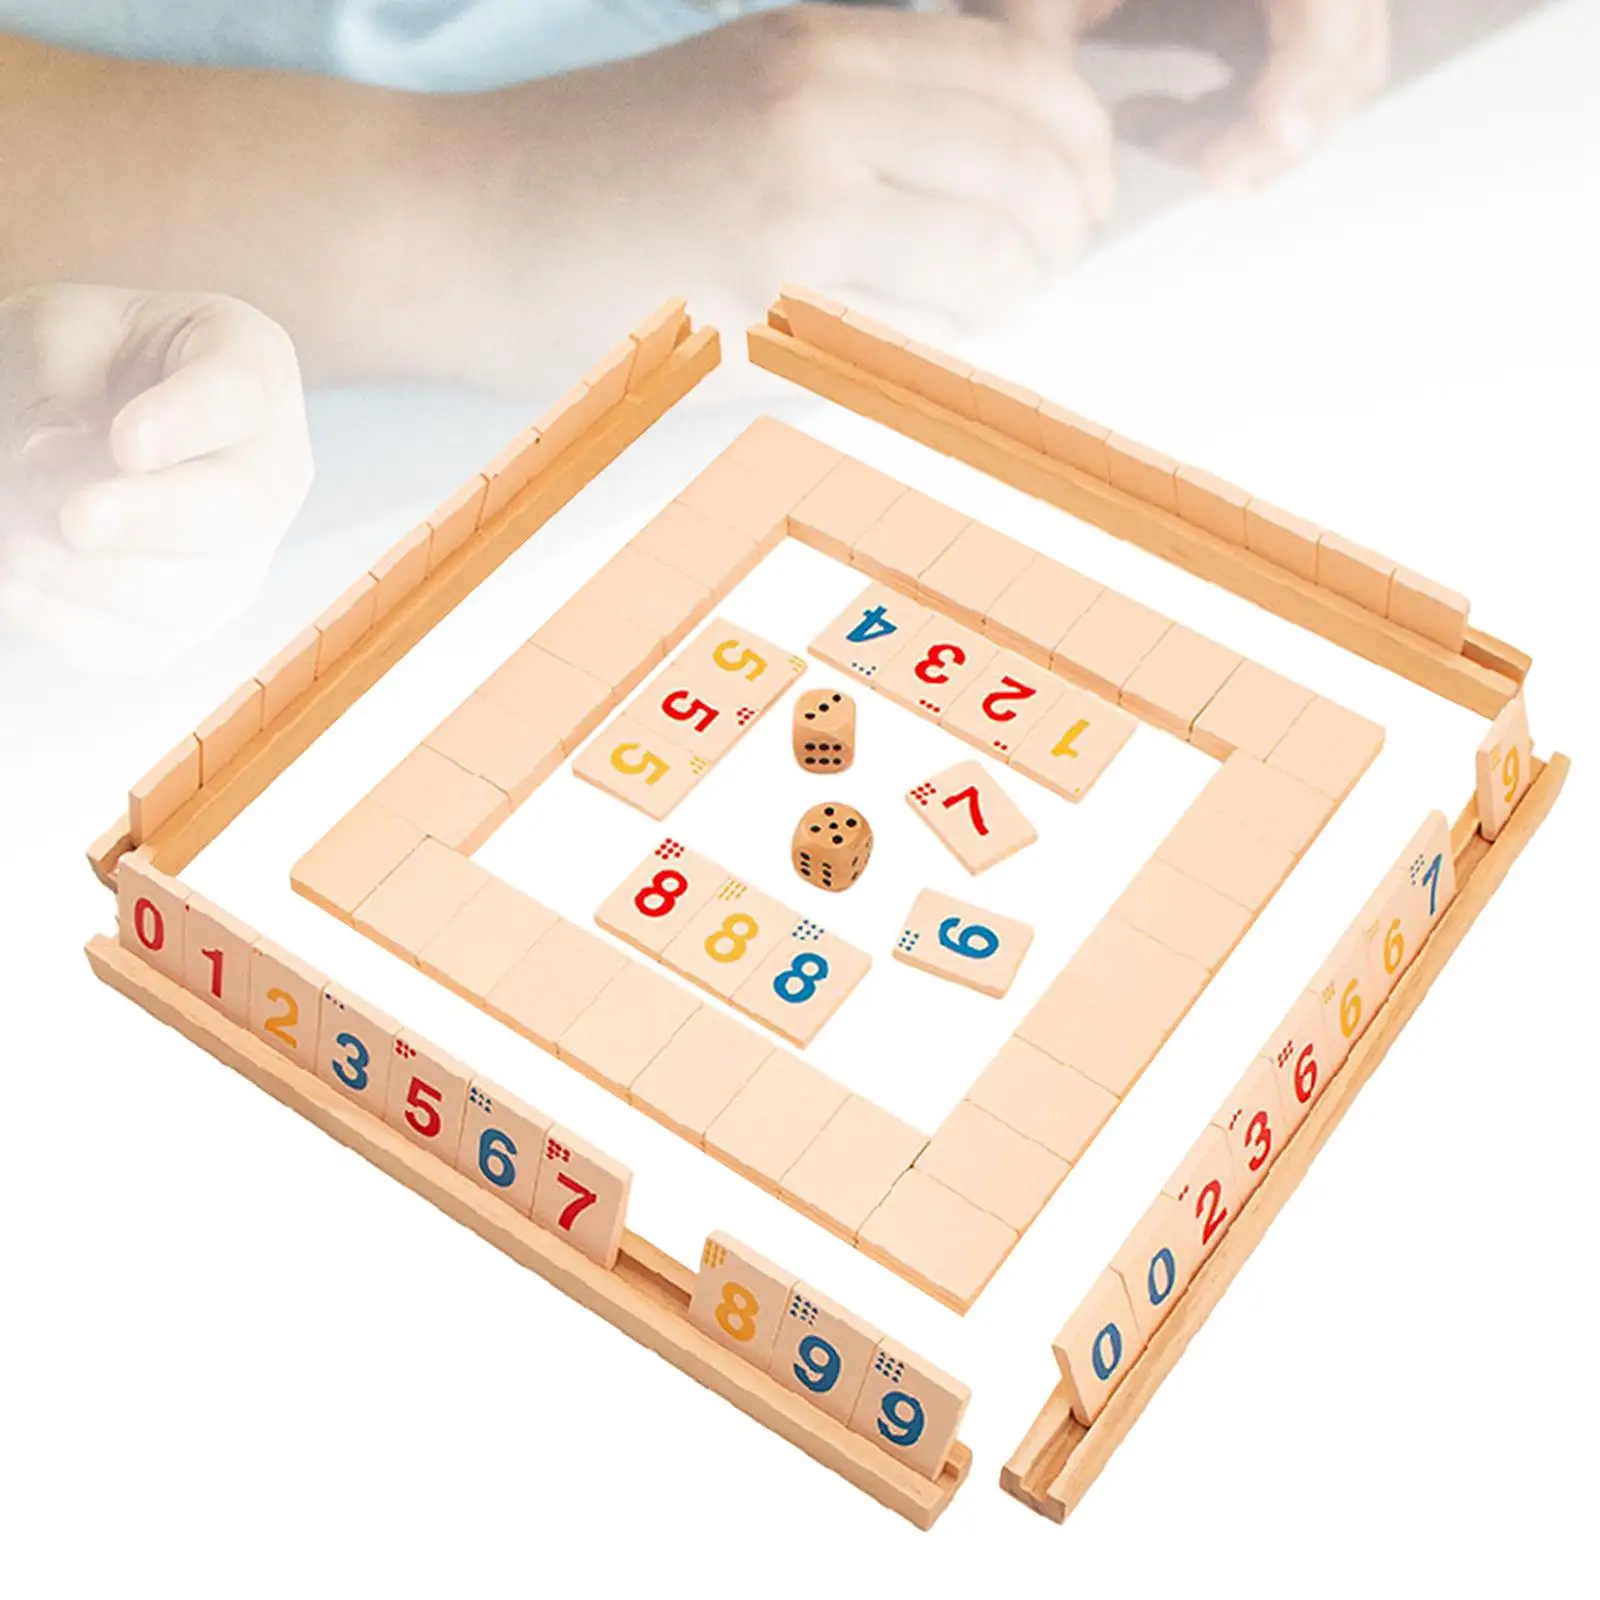 Wooden 2-4 People Mahjong Digital Game Family Party Game Fast Moving Tile for Teens Adults